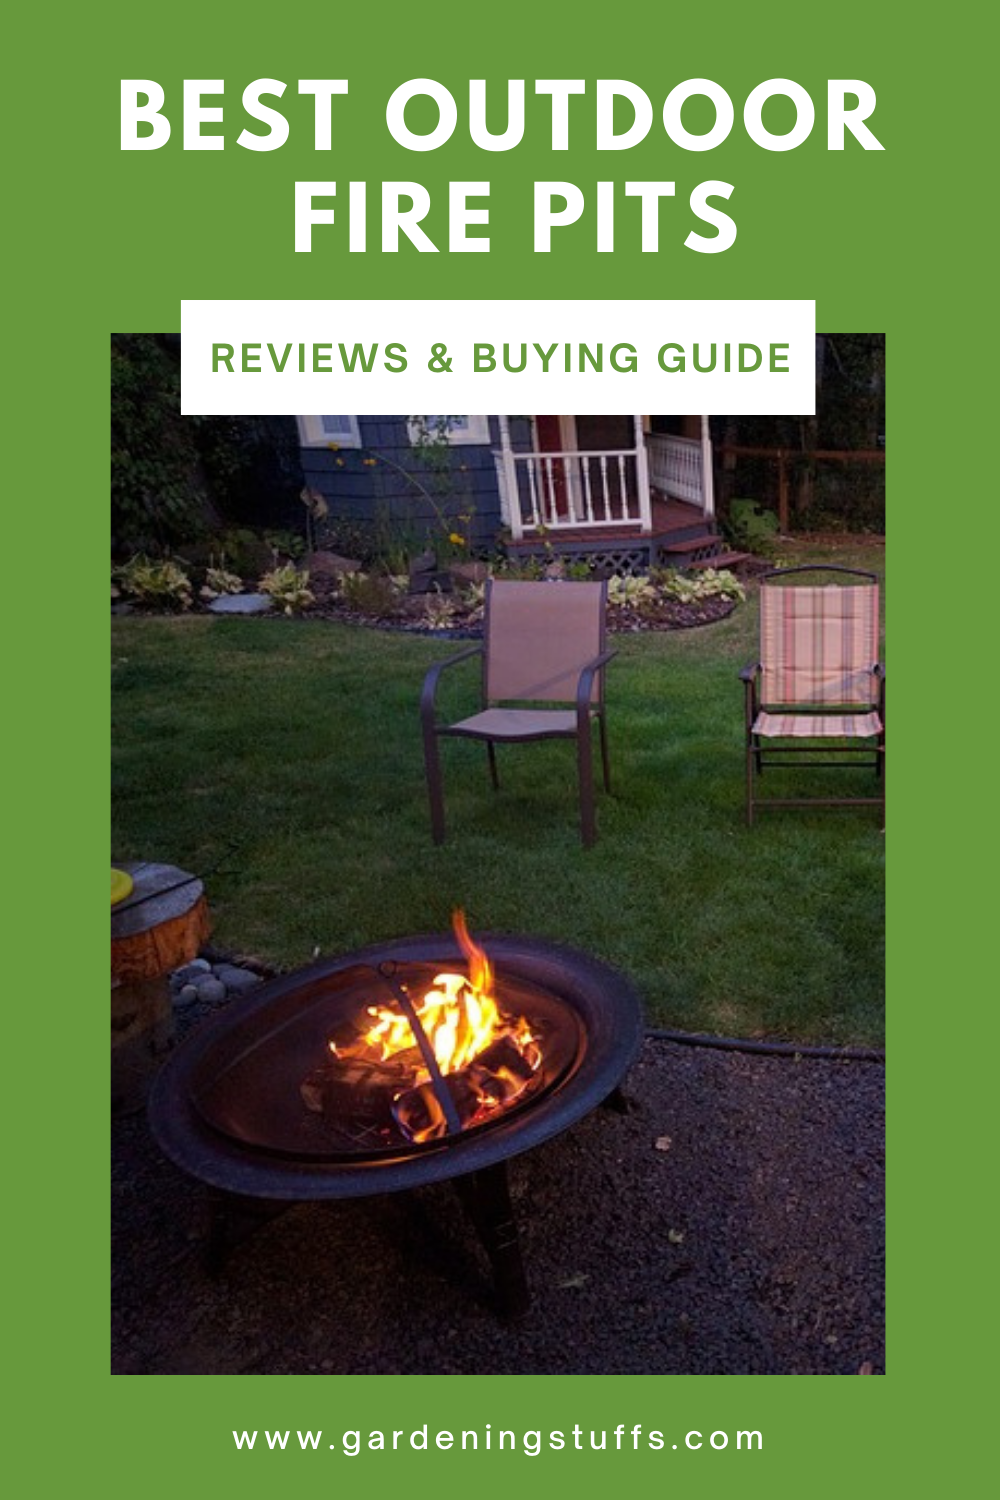 If you look after fire pit manufacturers, you can find plenty of brands out there which can easily fulfill the need. It is necessary that you should go after the selection of the best one to avoid getting into an issue. Checking all the features and design plays an important role. In this guide, we’ll help you out finding the perfect one for your specific need.